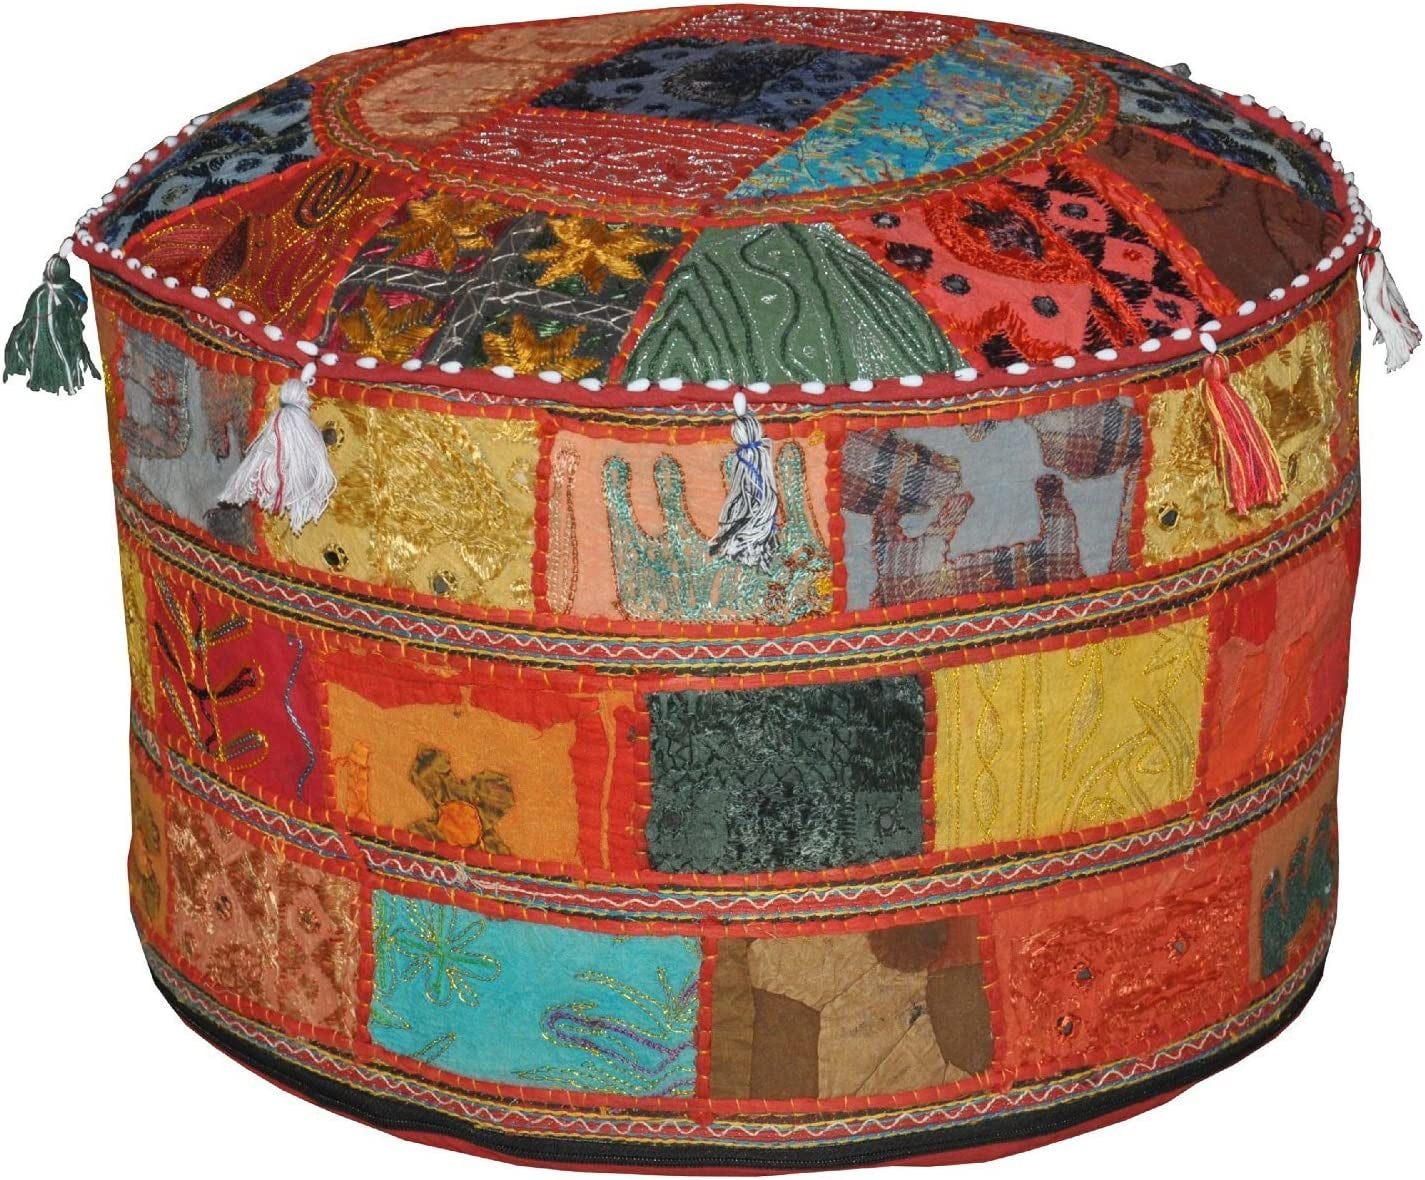 India Floor Cotton Ottoman Embellished with Patchwork and Embroidery Work Cushion Cover